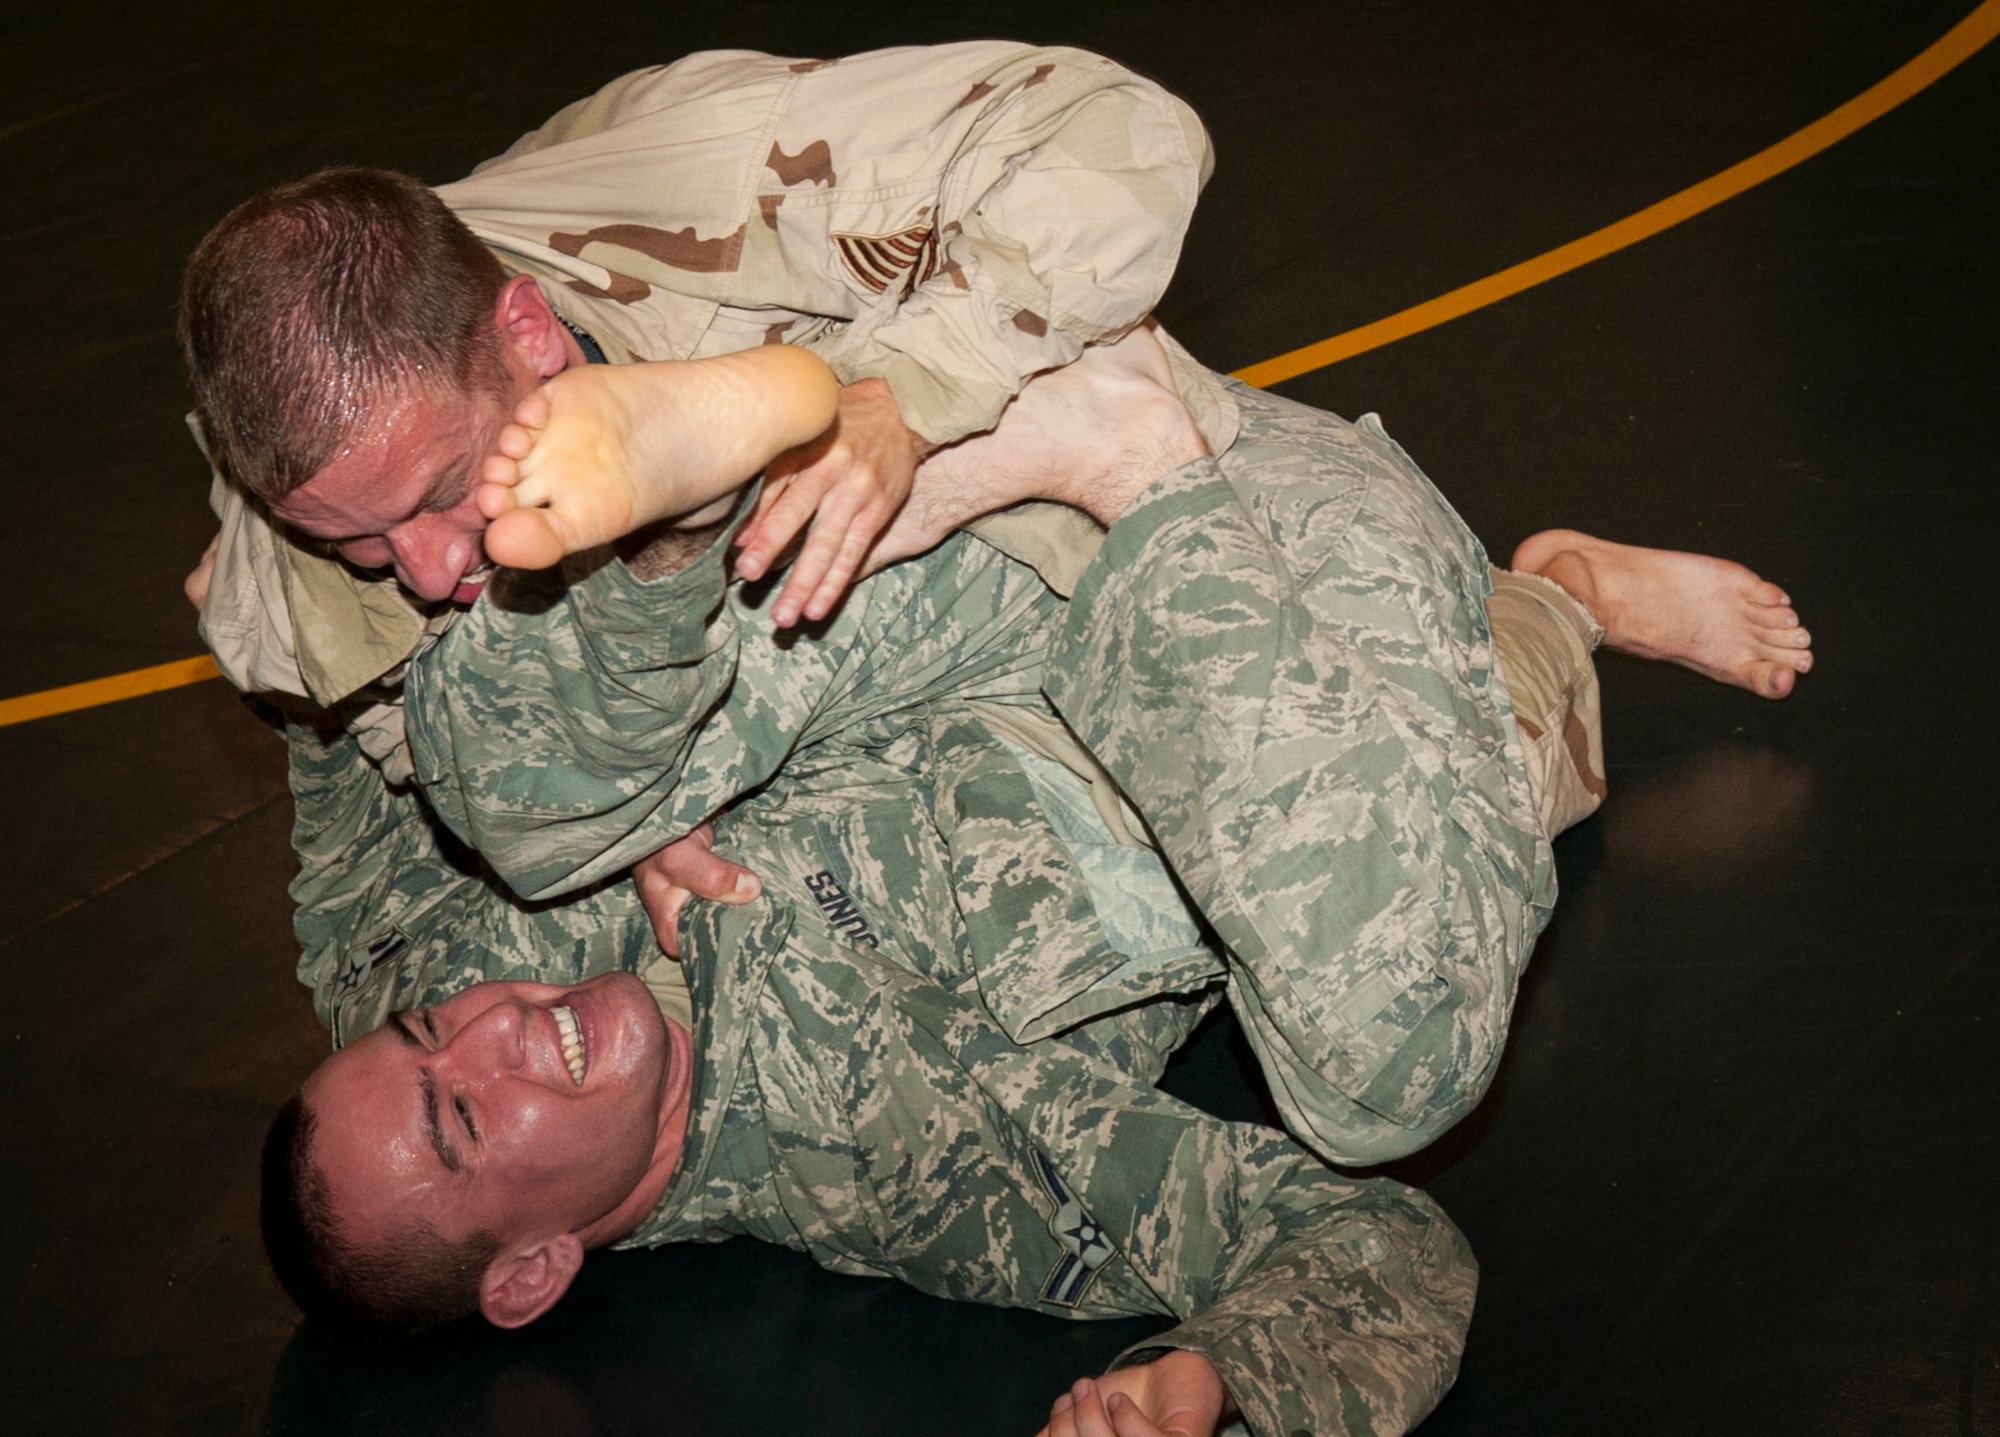 U.S. Air Force Staff Sgt. Christian Coleman, Misawa Combatives instructor, and Airman 1st Class Michael Jones, Misawa Combatives participant, grapple at the Misawa Combatives class at Misawa Air Base, Japan, July 30, 2013. Seventeen Airmen moved on to Level 2 of the Misawa Combatives Program, which is organized and led by Coleman. (U.S. Air Force photo by Airman 1st Class Zachary Kee) 